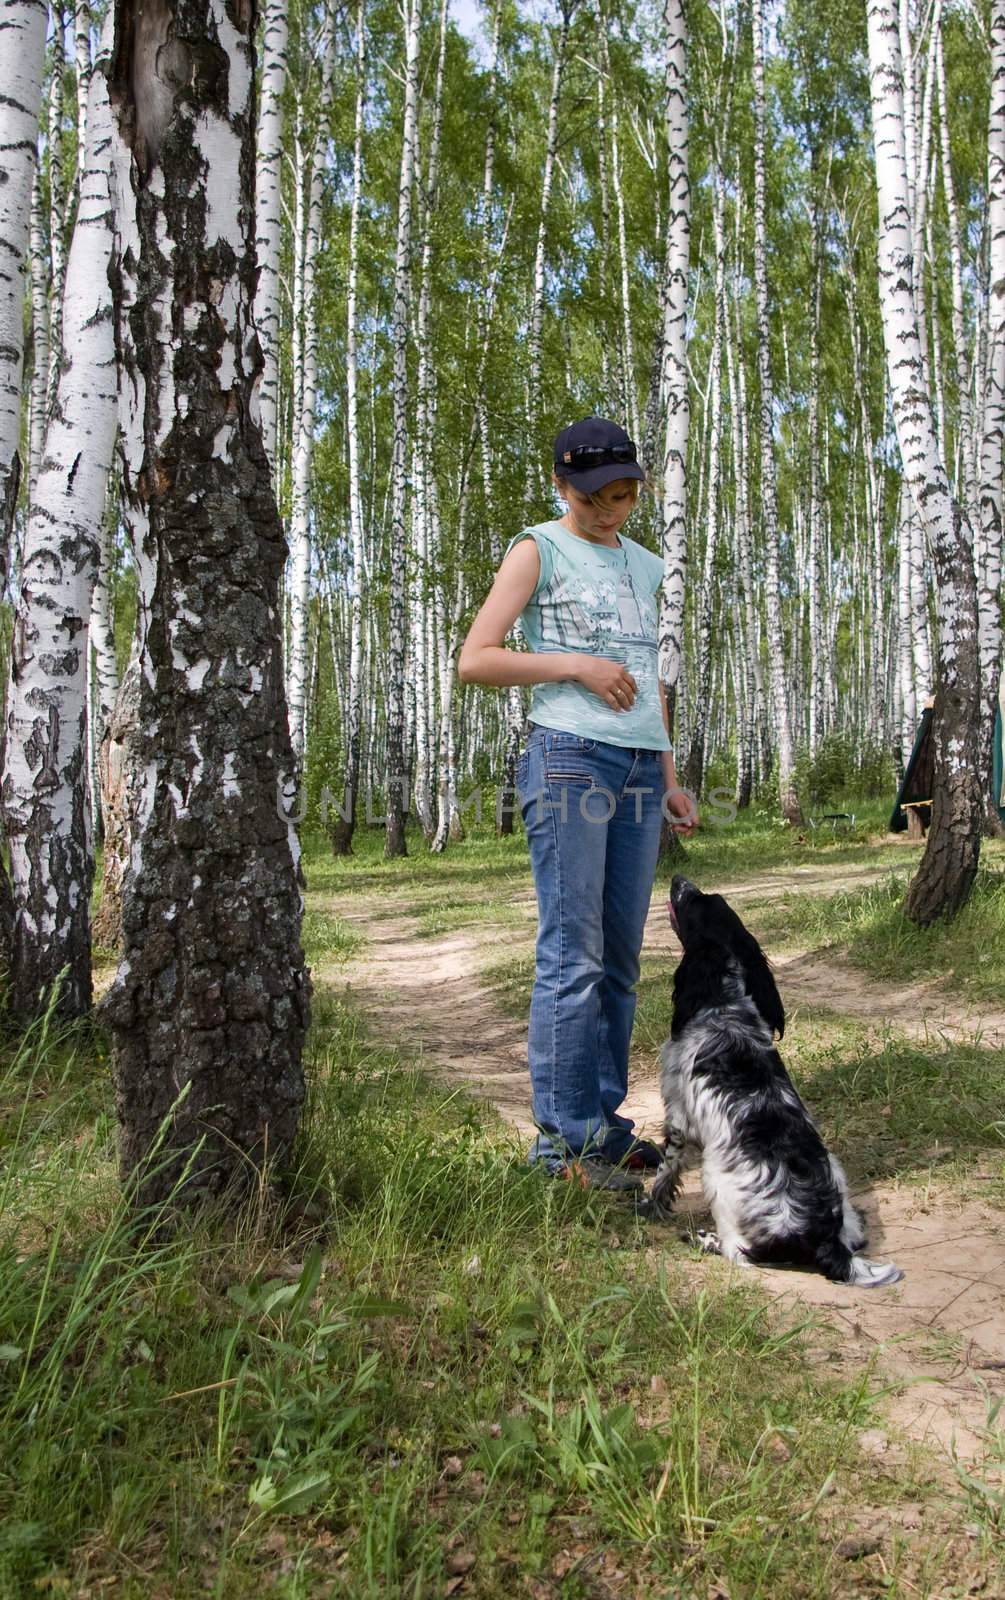 The girl with a dog in a birchwood.